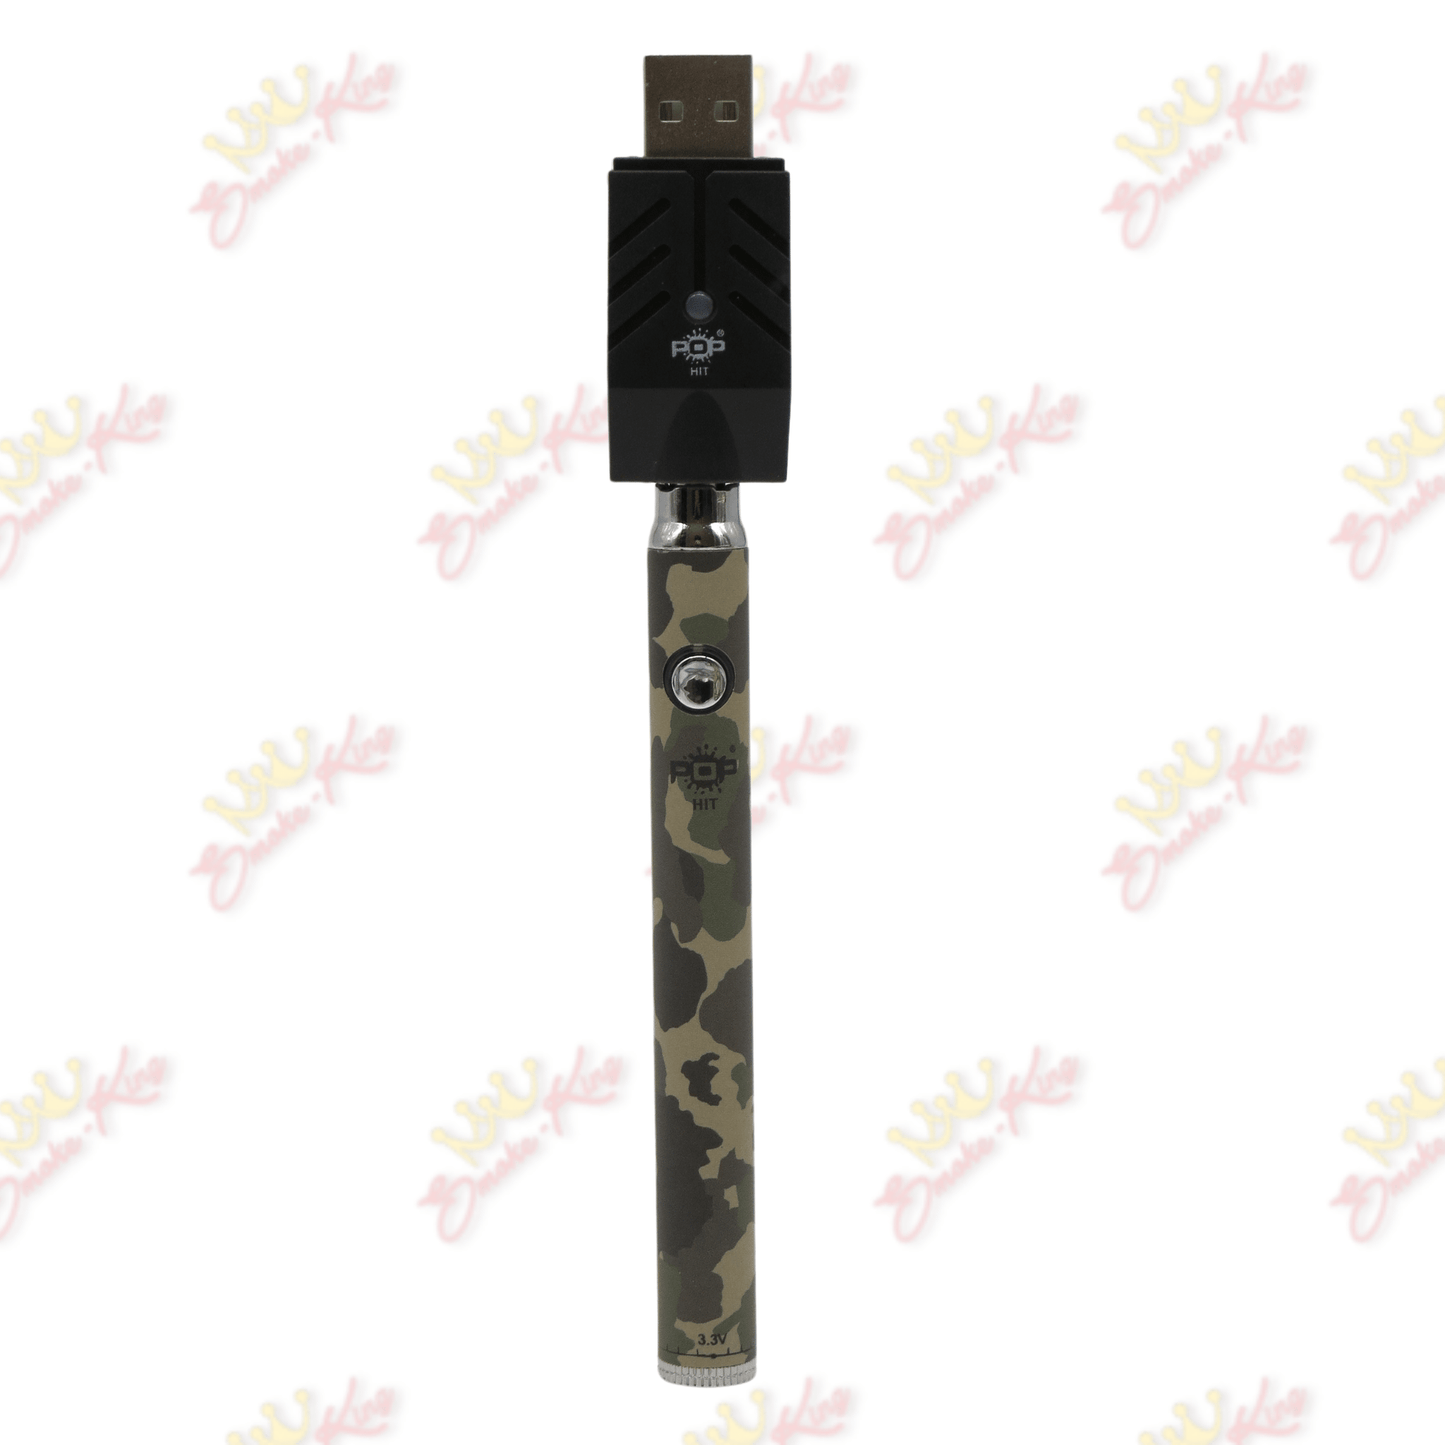 Pop Hit Army camouflage Pop Hit 510 Cart Battery Pop Hit 510 Cart Battery | Cartridge Battery | Smoke King